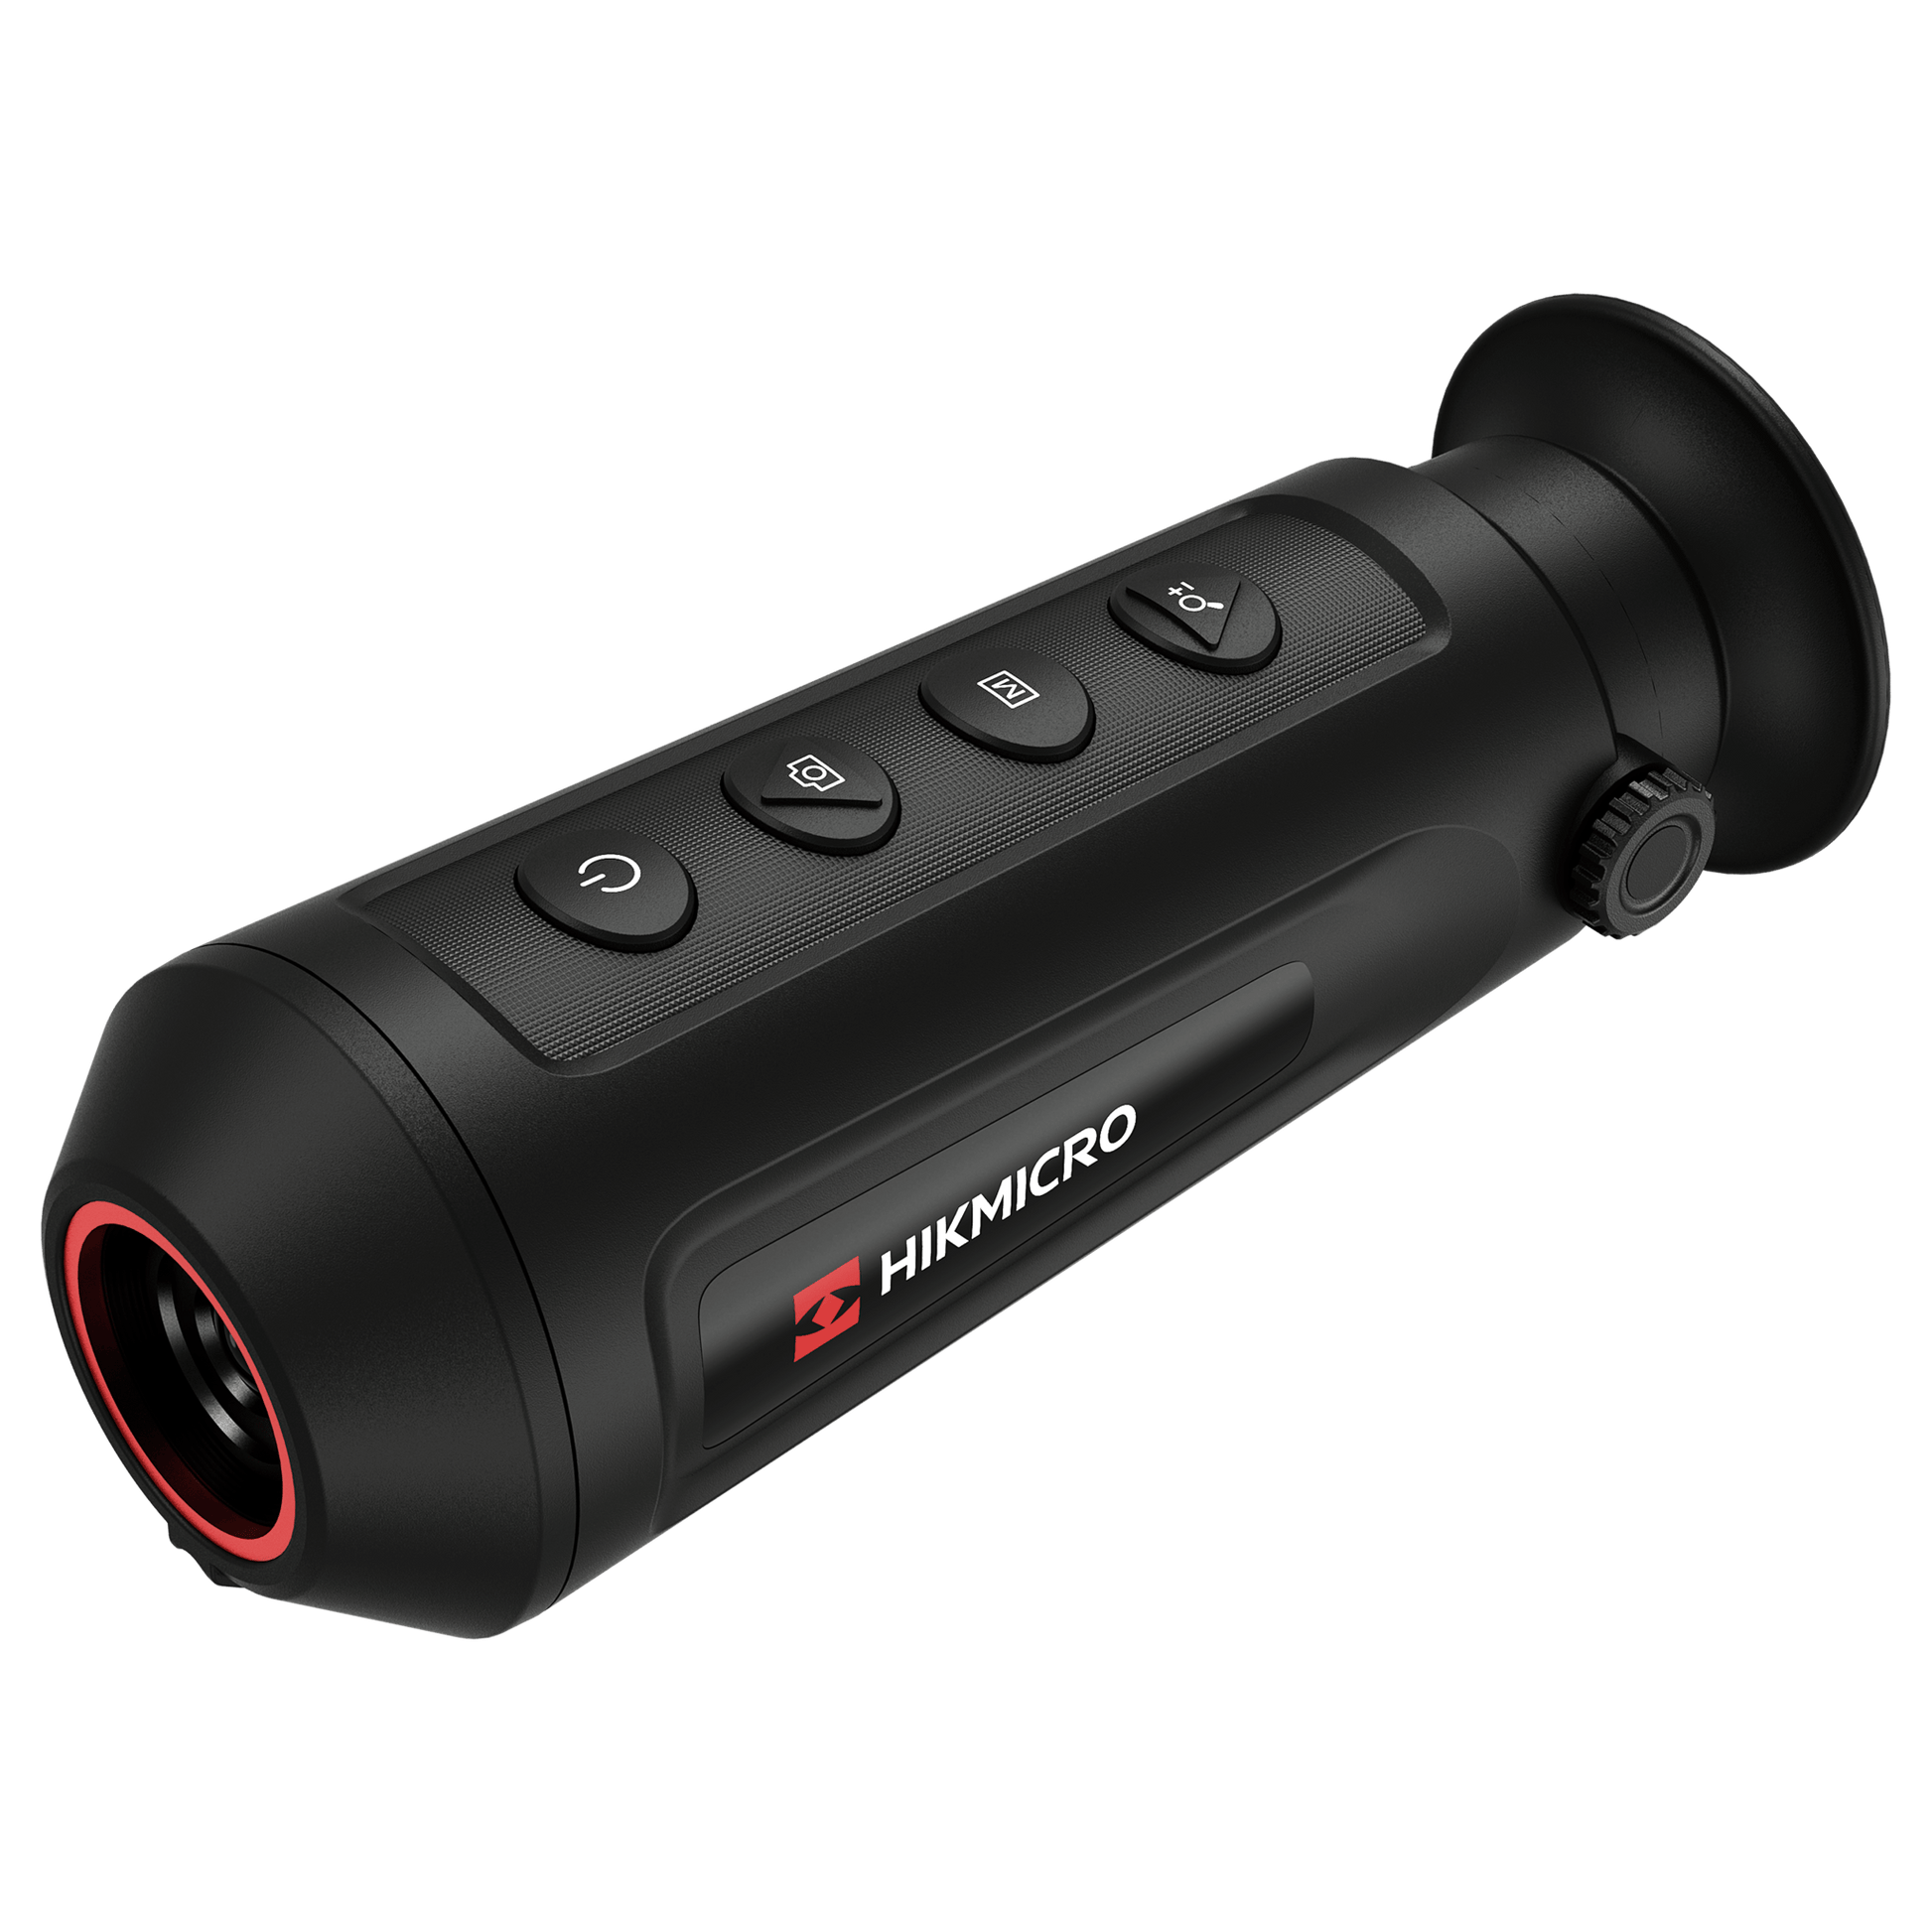 Cape Thermal - The best thermal imaging monoculars for sale - HikMicro LYNX LC06 Handheld thermal imaging monocular - Right Side View